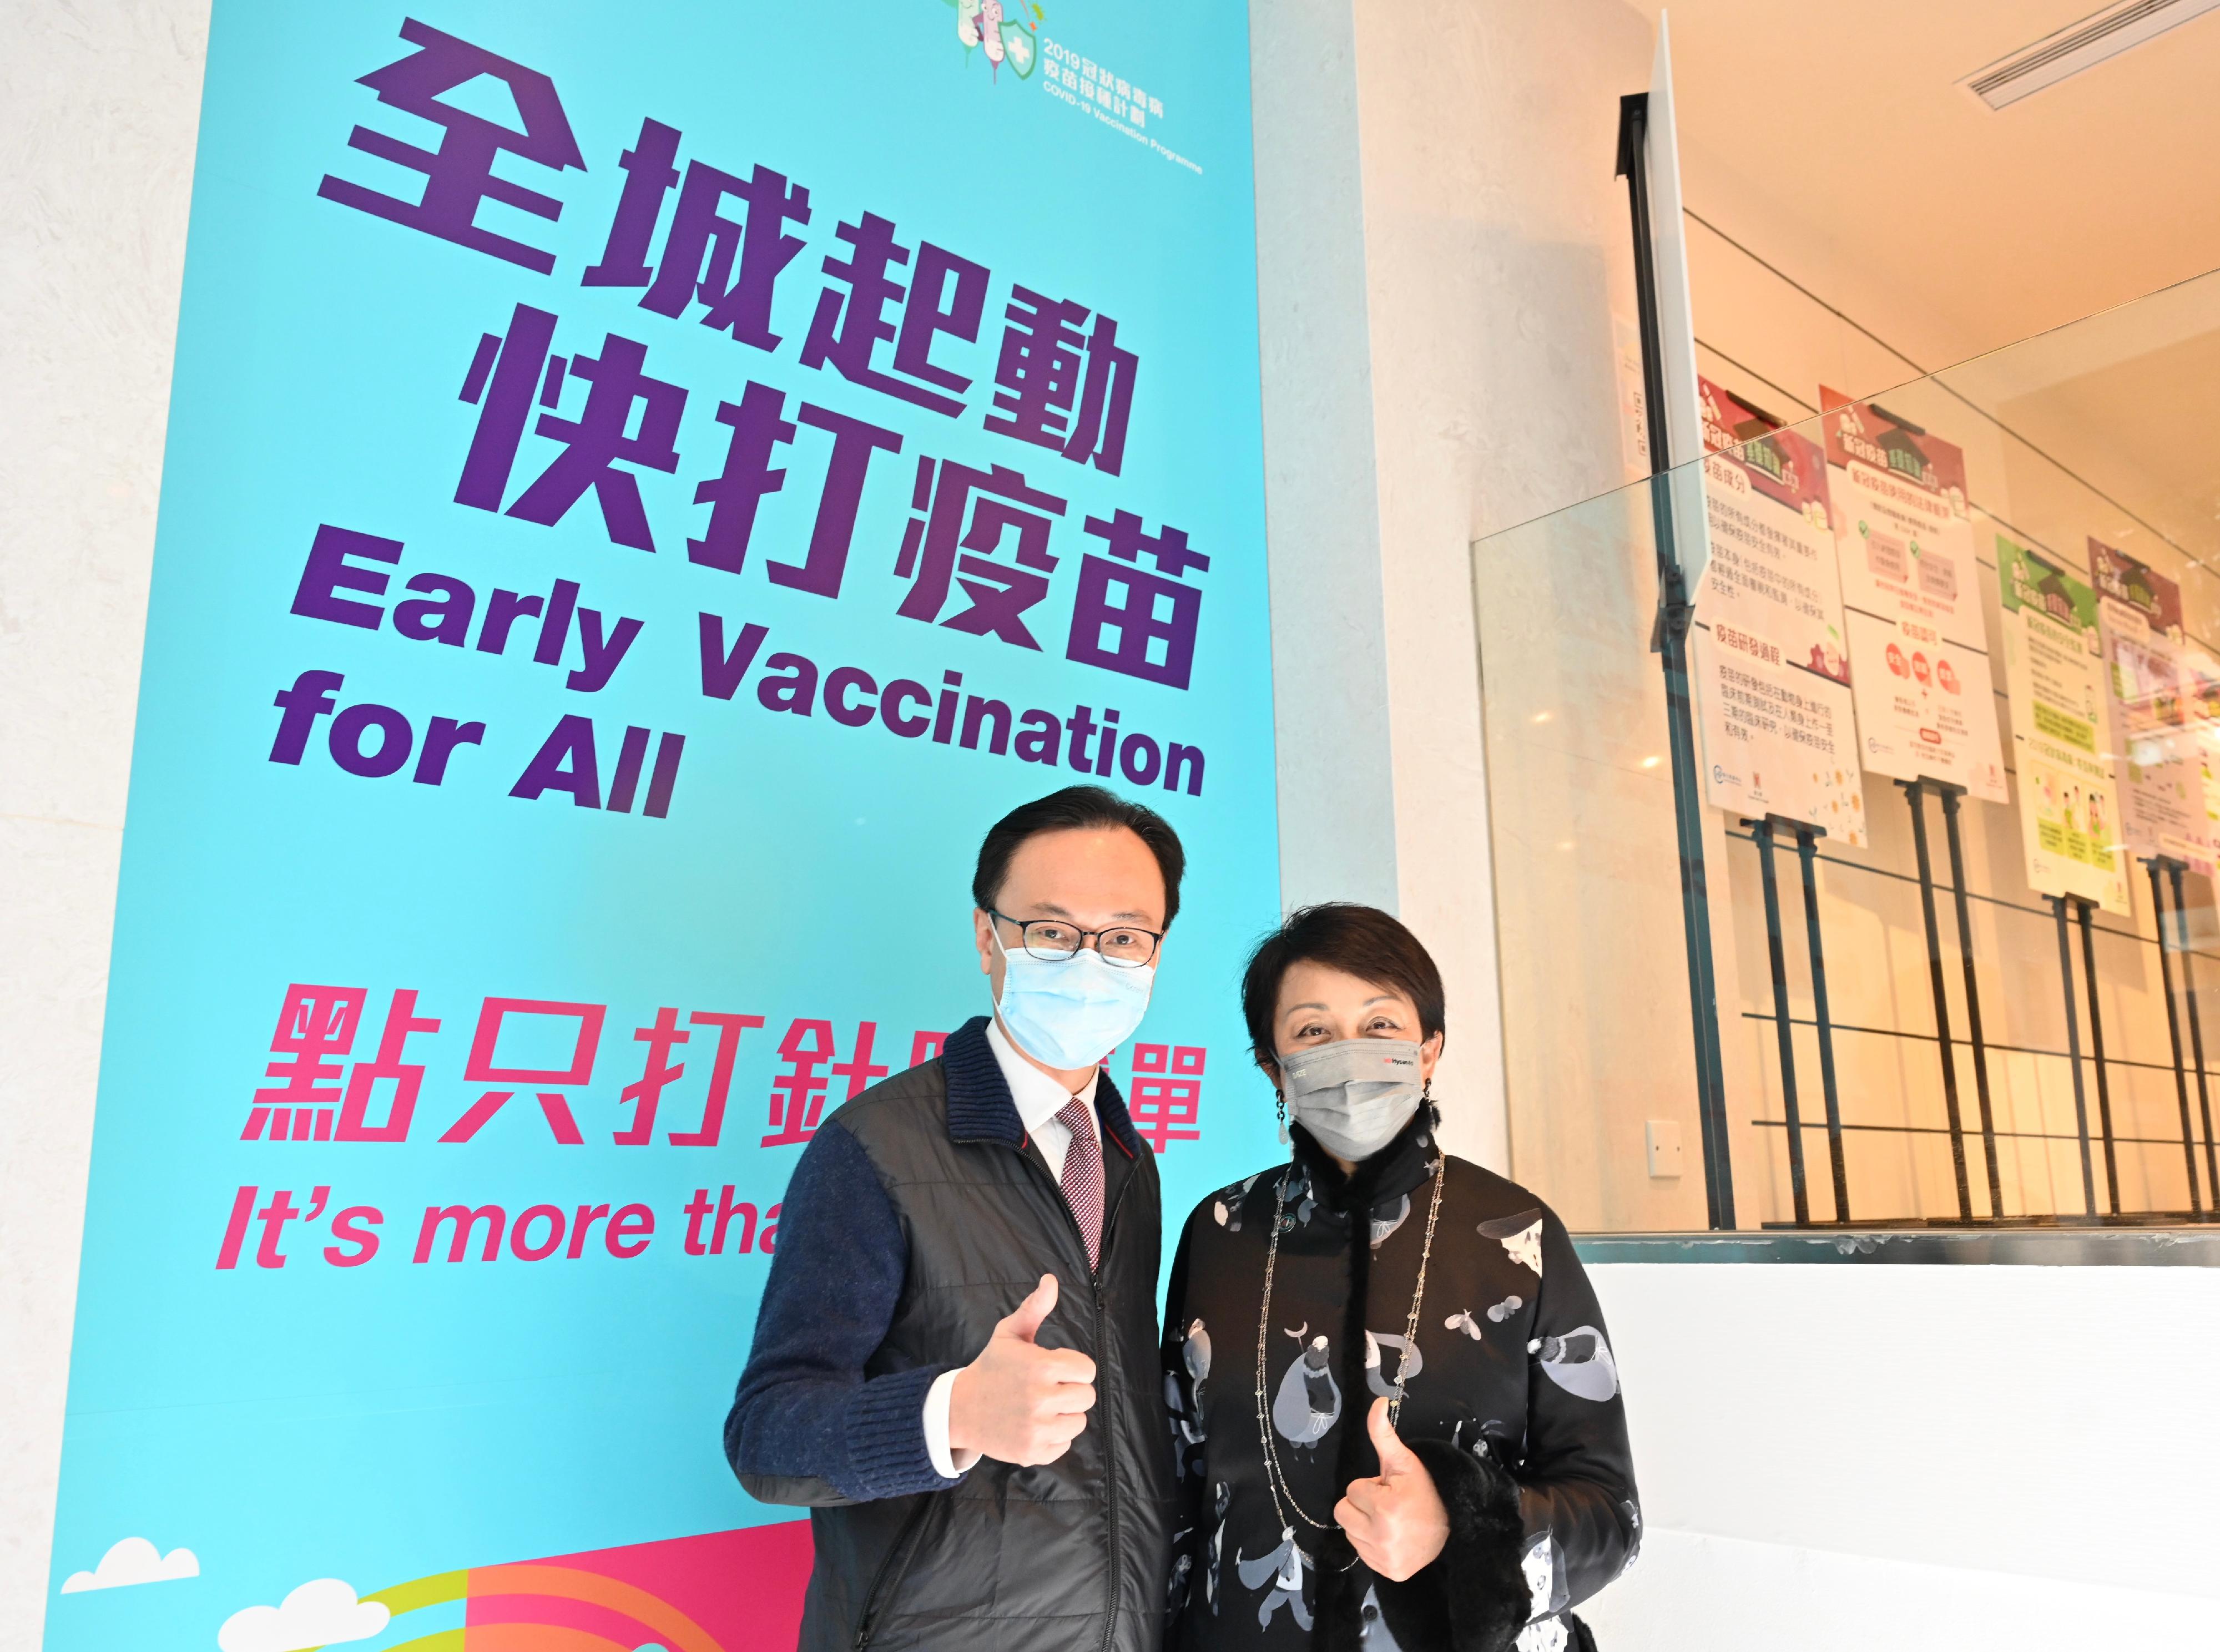 The Satellite Community Vaccination Centre in Leighton Centre in Causeway Bay came into operation today (February 11) to provide the BioNTech vaccination service to members of the public. The Secretary for the Civil Service, Mr Patrick Nip (left), and the Chairman of Hysan Development, Ms Irene Lee (right), are pictured showing their support for the COVID-19 Vaccination Programme.